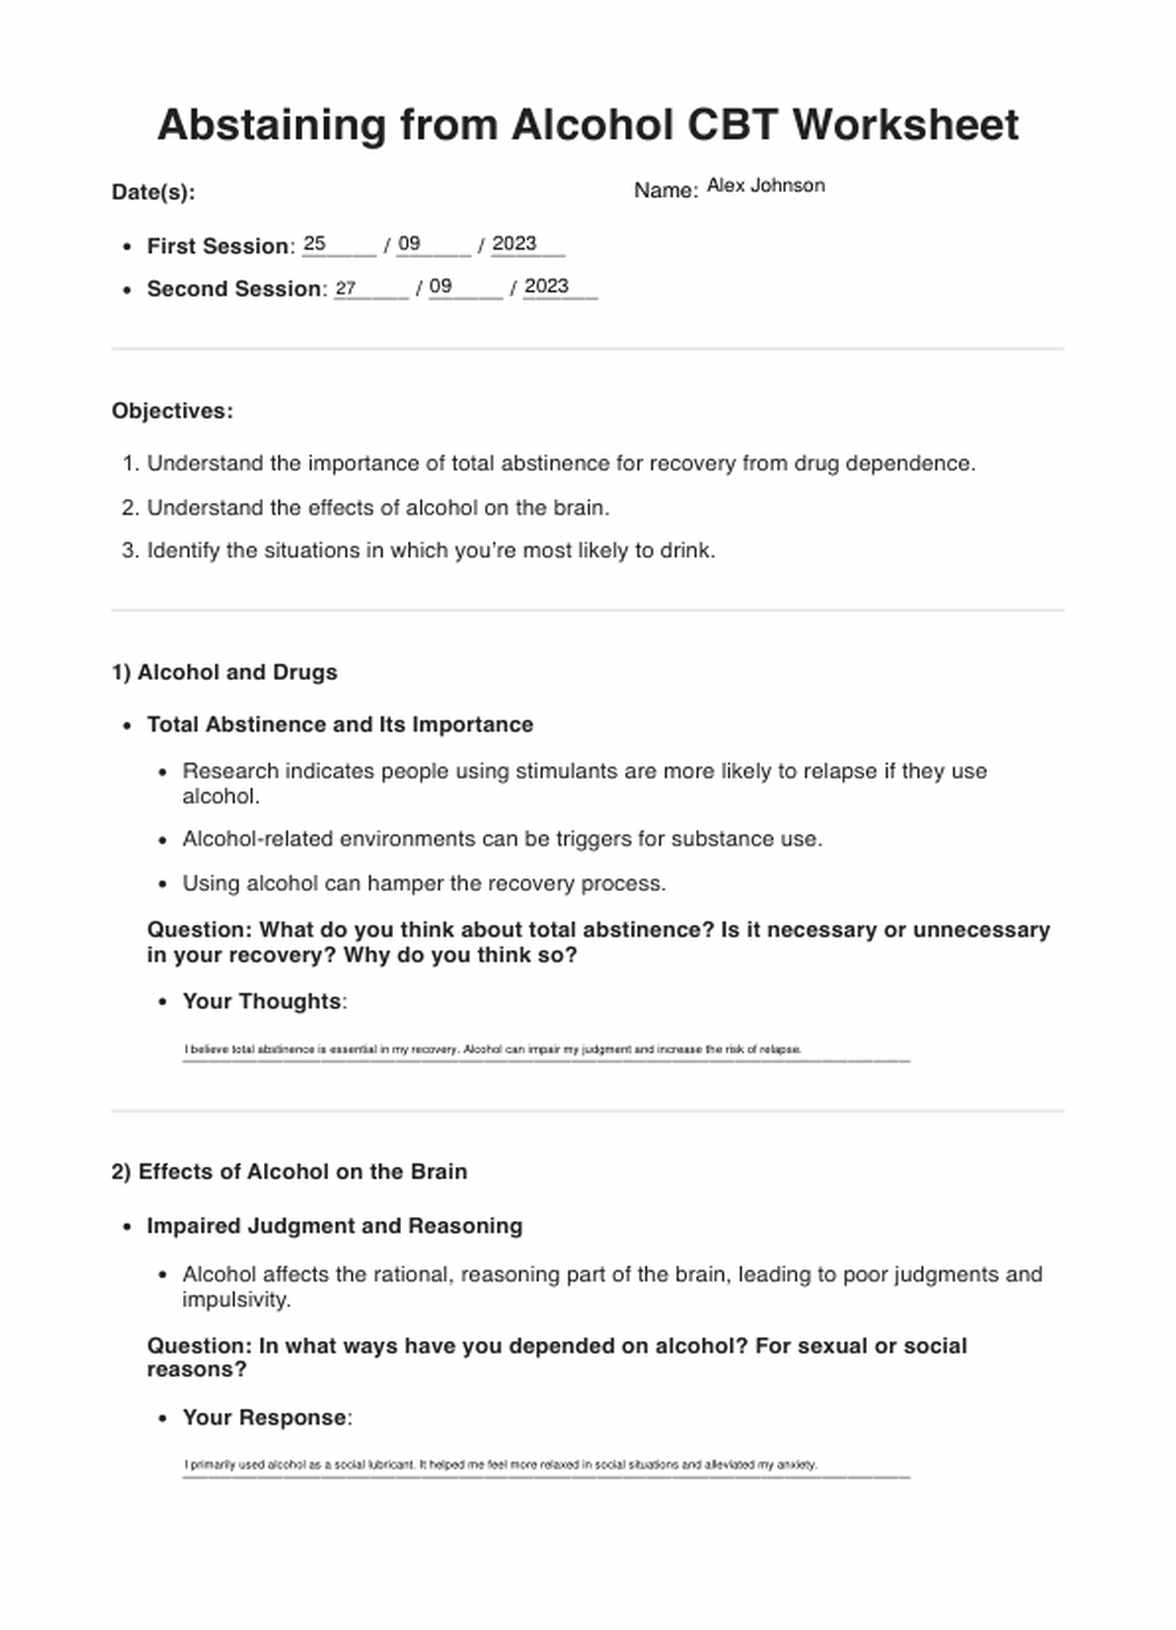 Abstaining from Alcohol CBT Worksheet PDF Example